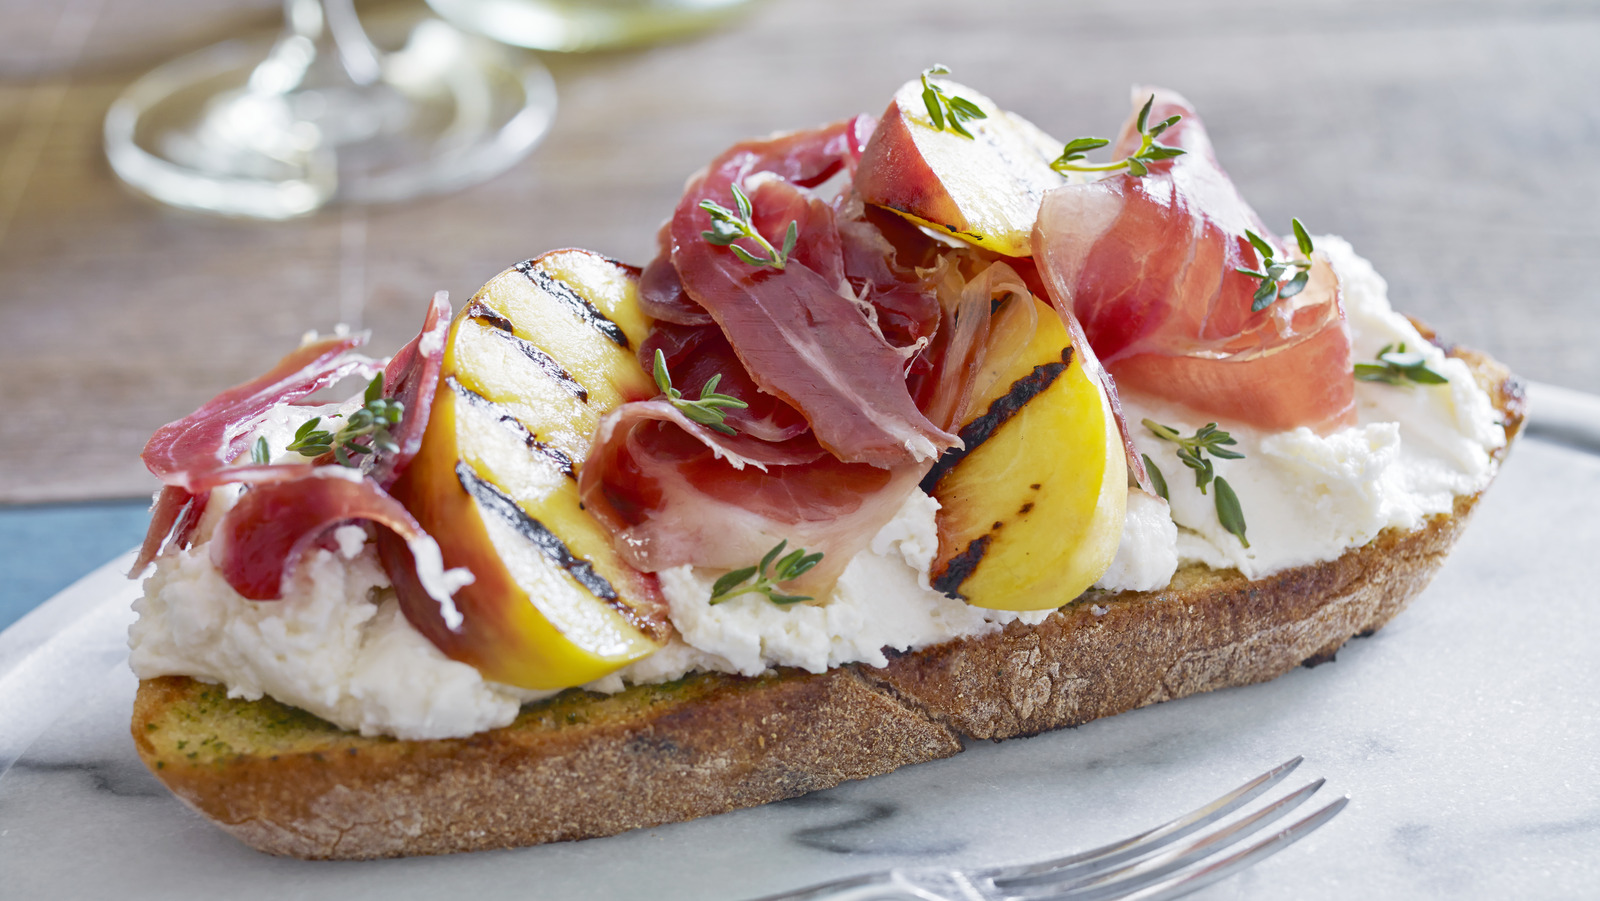 Put A Sweet Spin On Savory Sandwiches With Fresh Fruit – Mashed